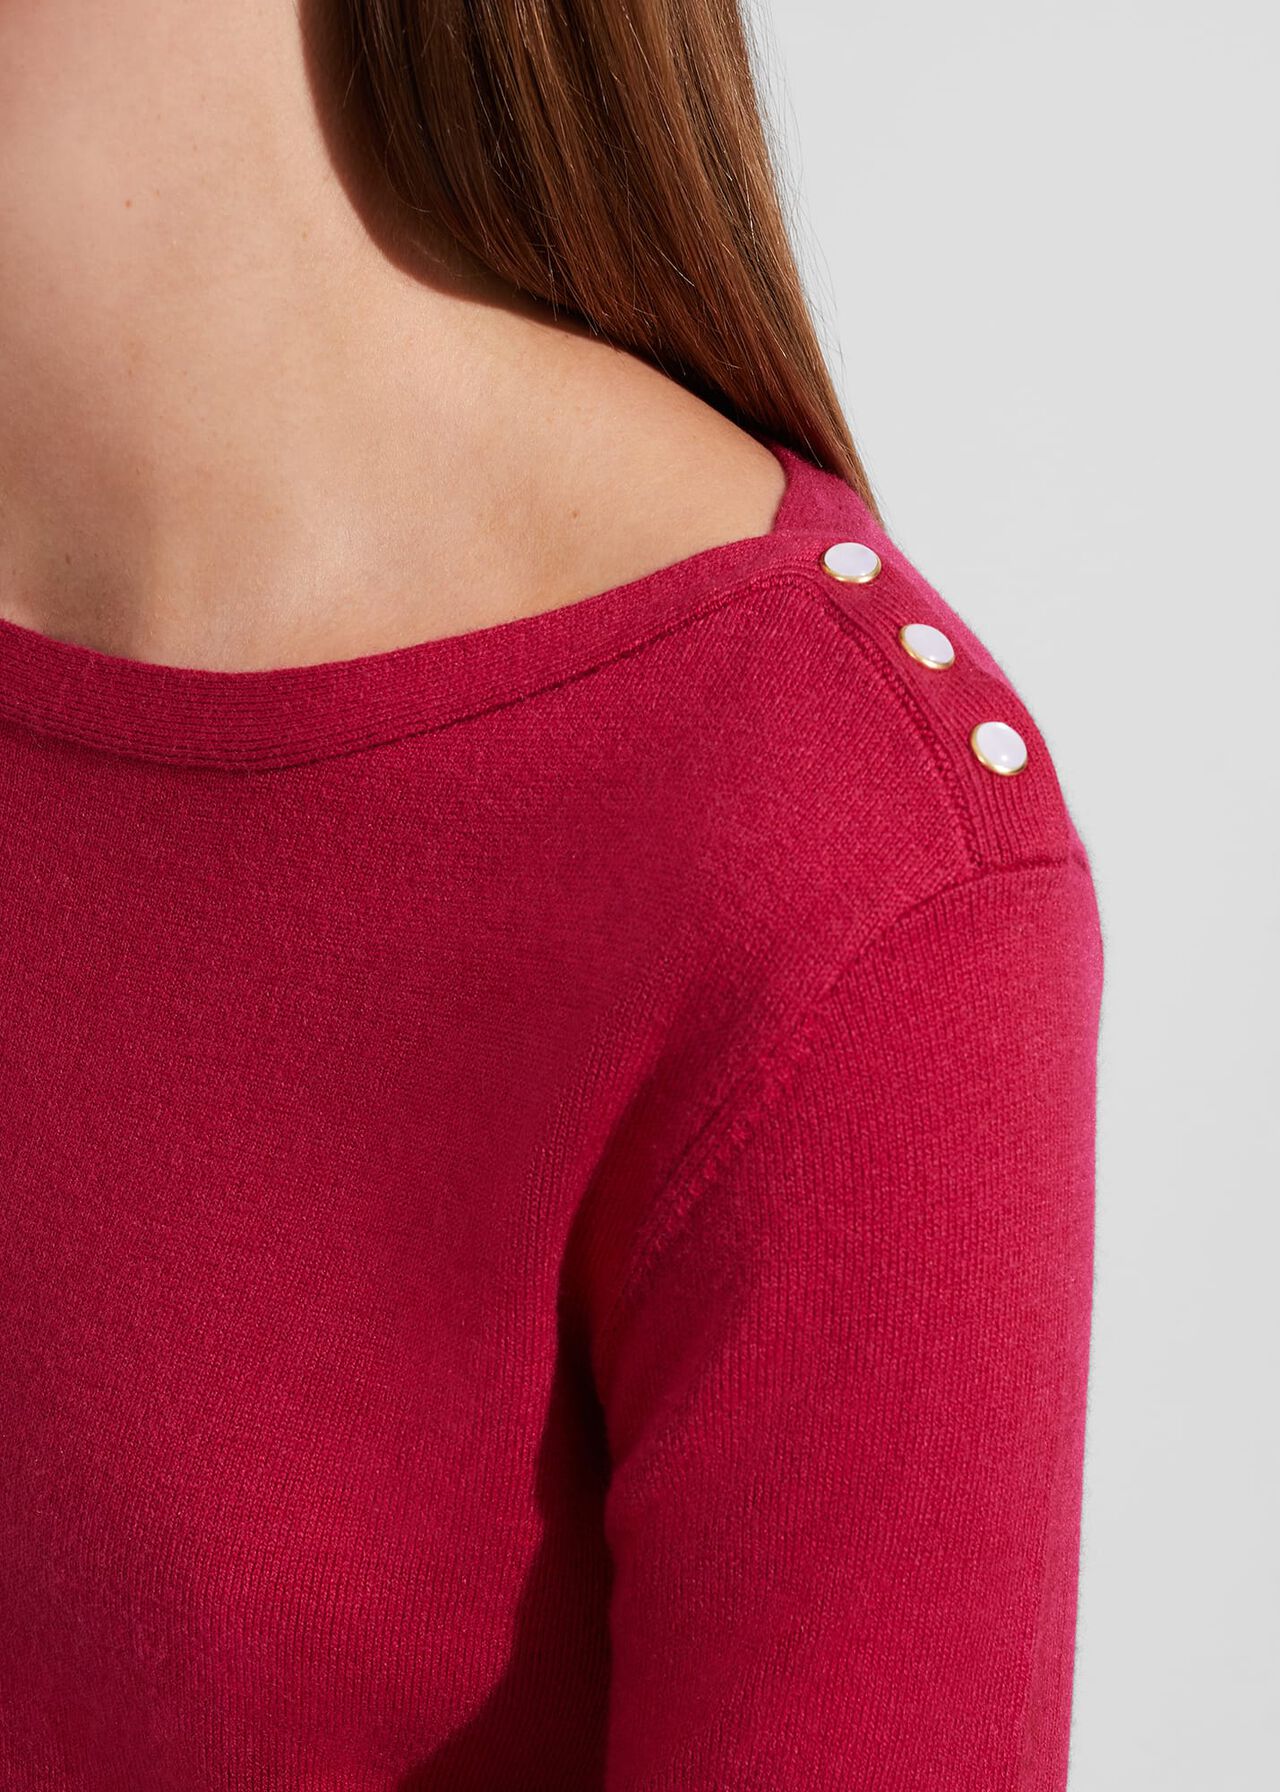 Petula Jumper With Wool, Berry Red, hi-res